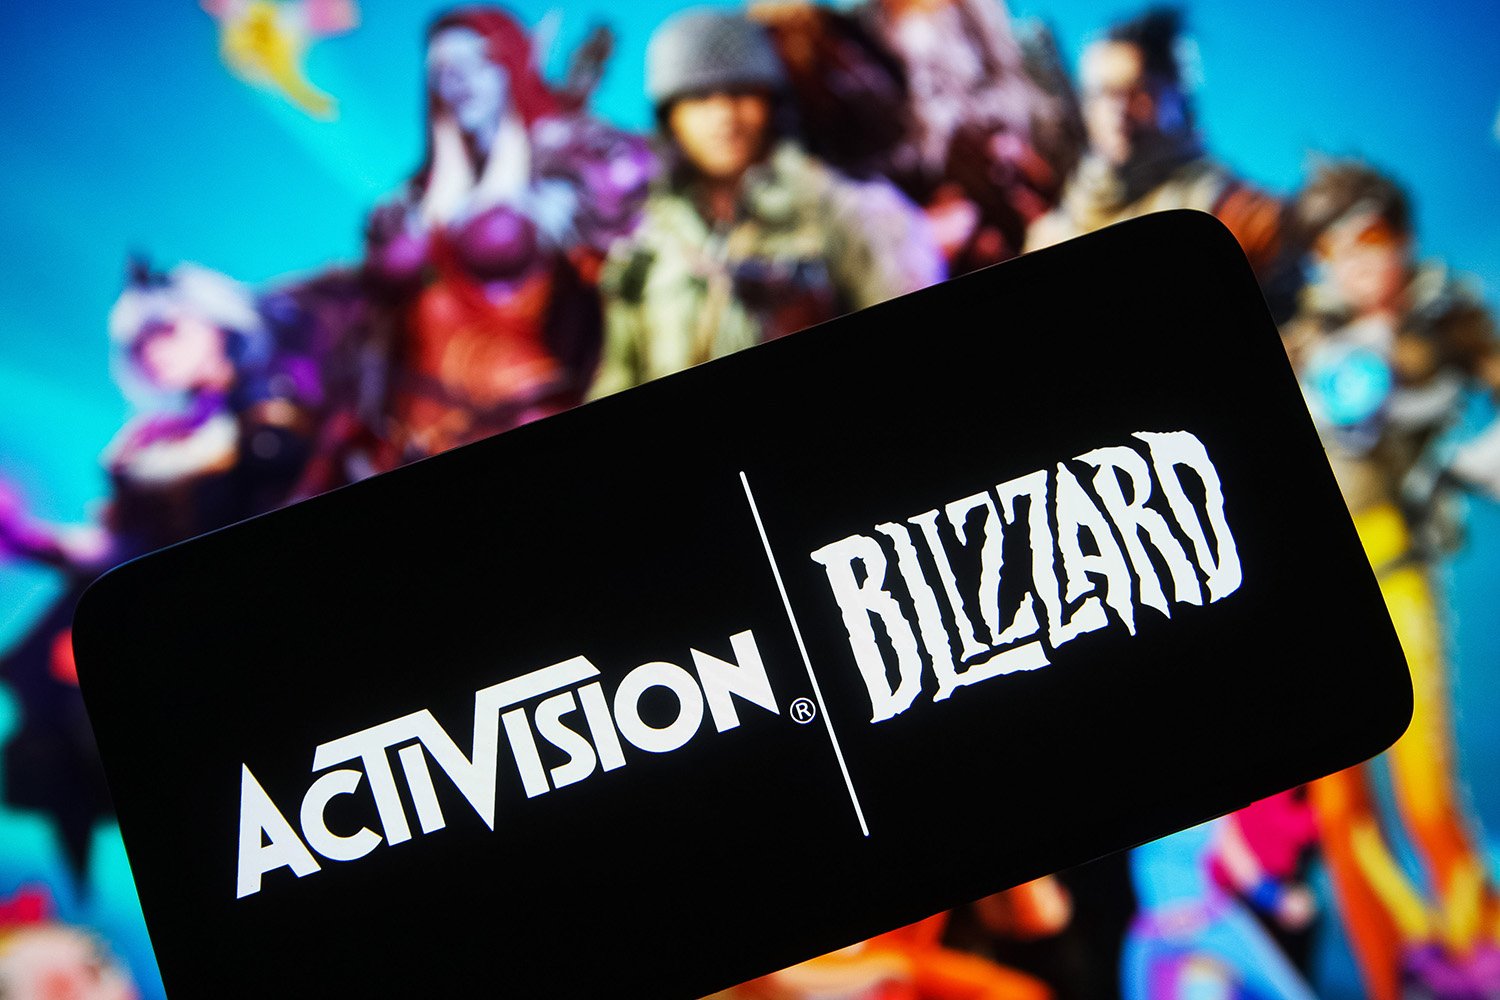 The Activision Blizzard logo on a phone screen after Microsoft's deal to buy the company